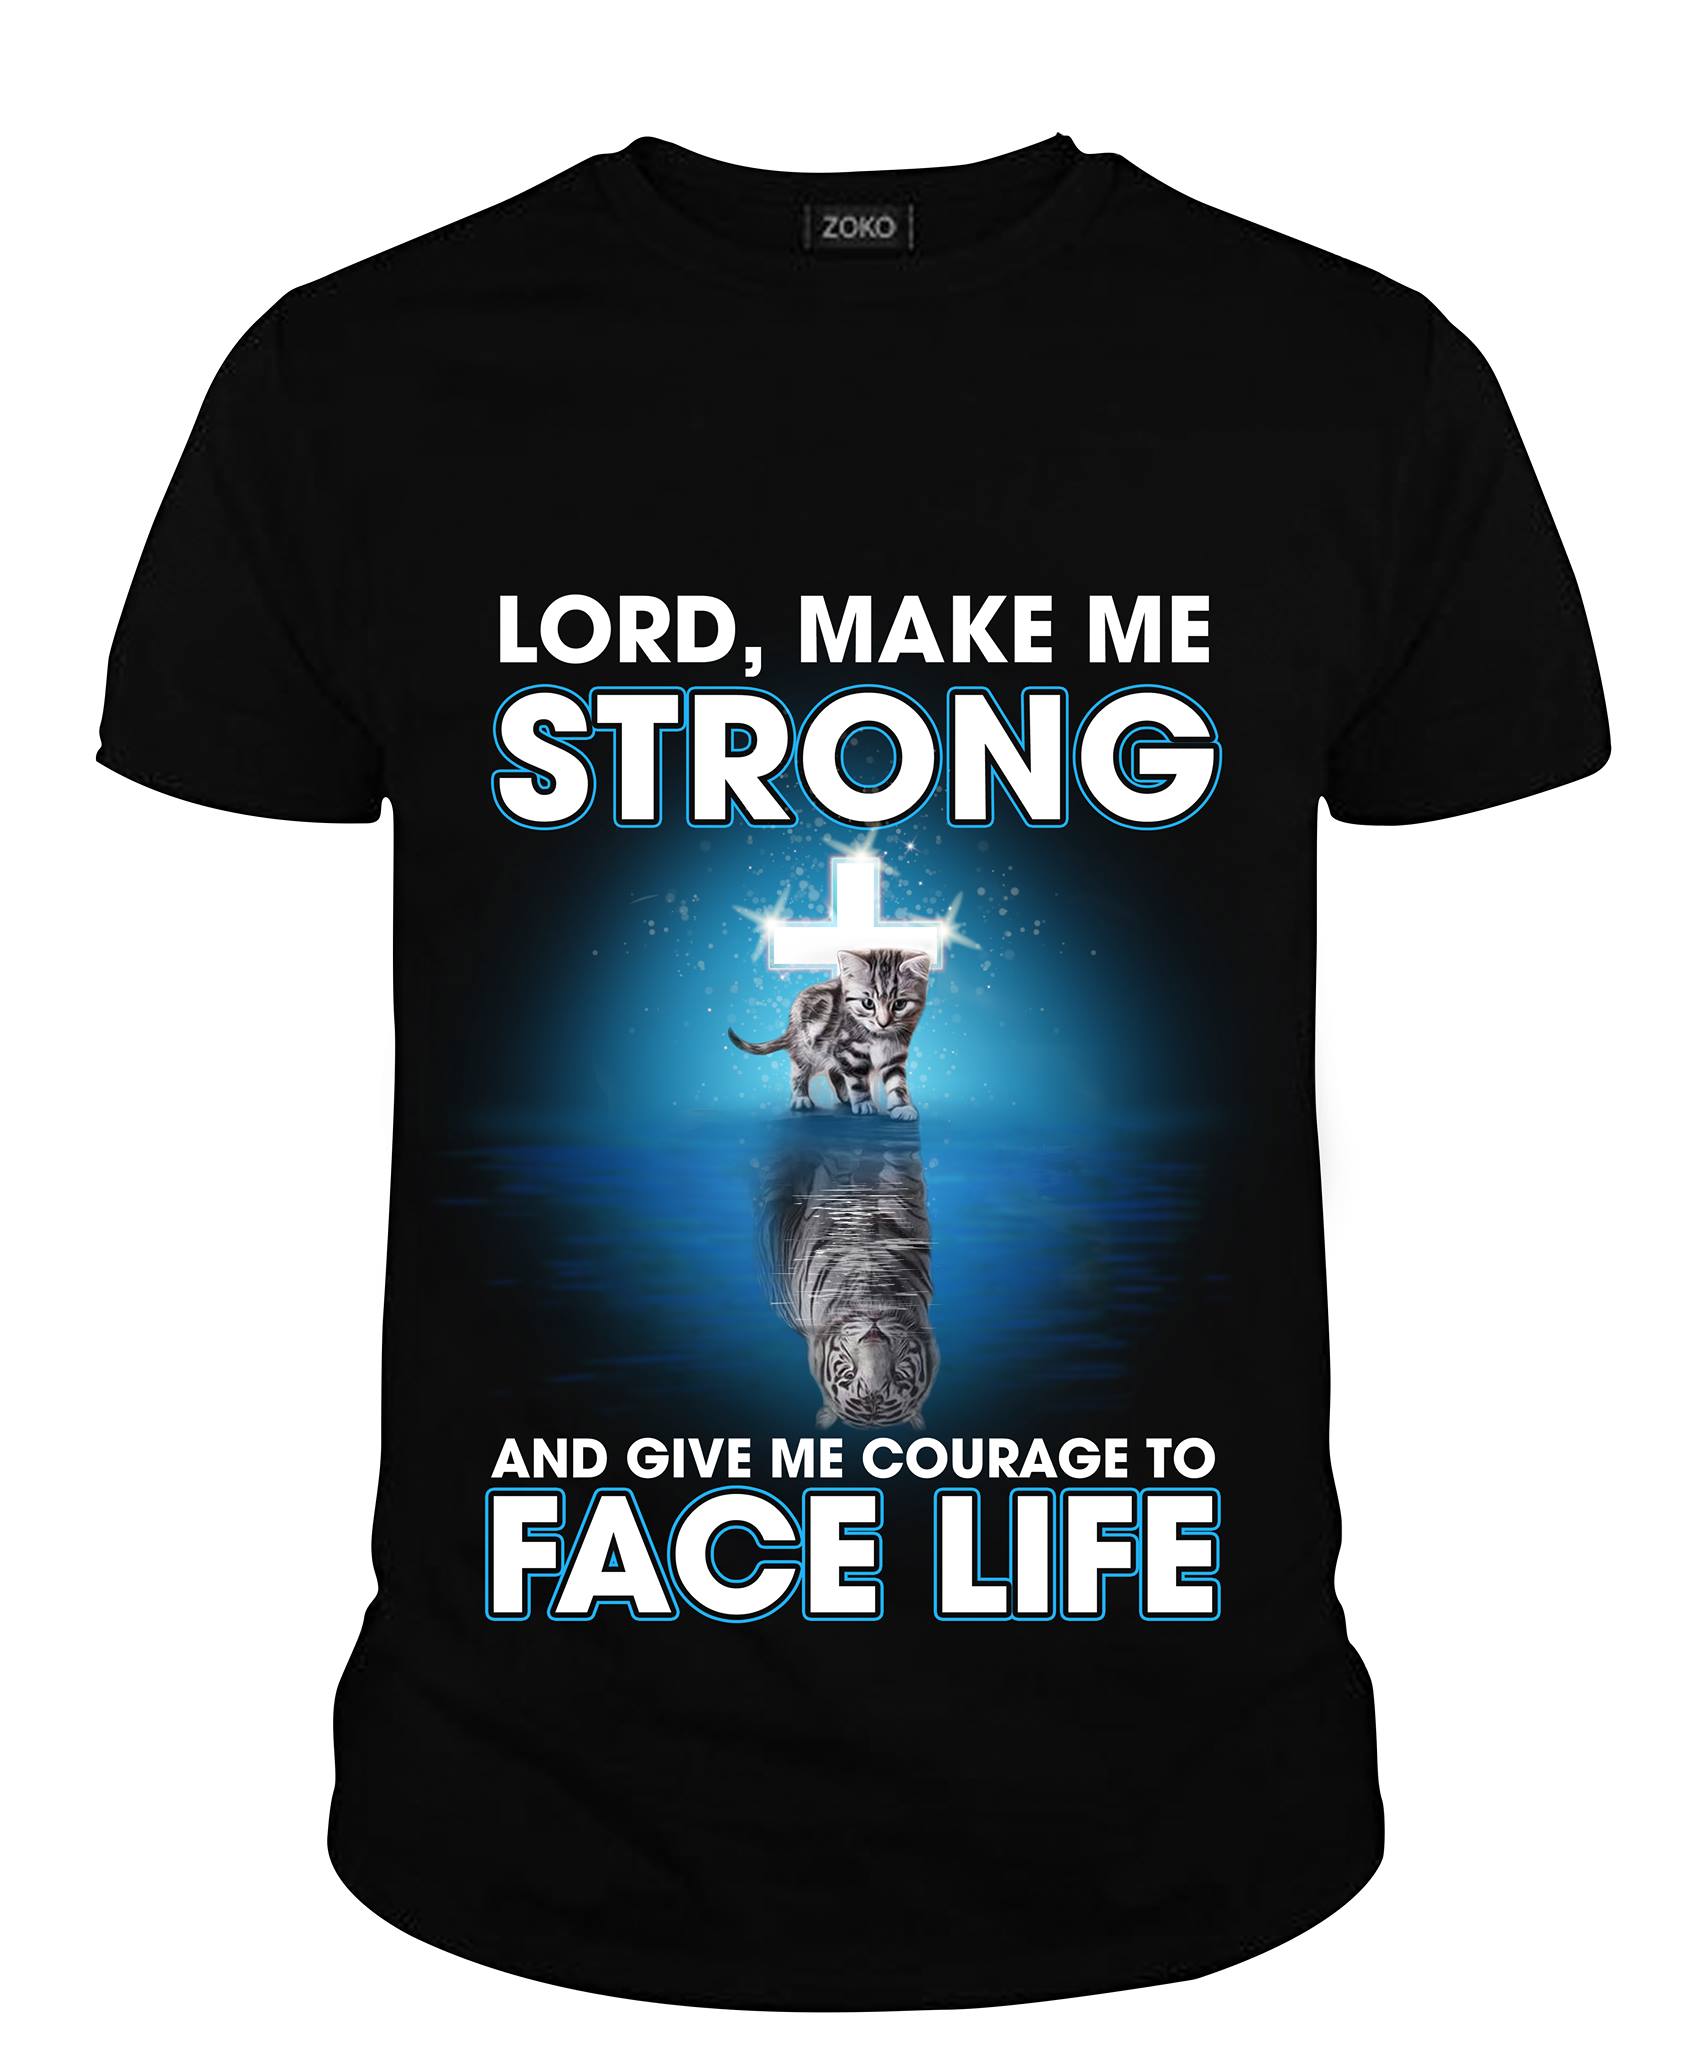 Lord, make me strong and give me courage to face life - Cat and tiger